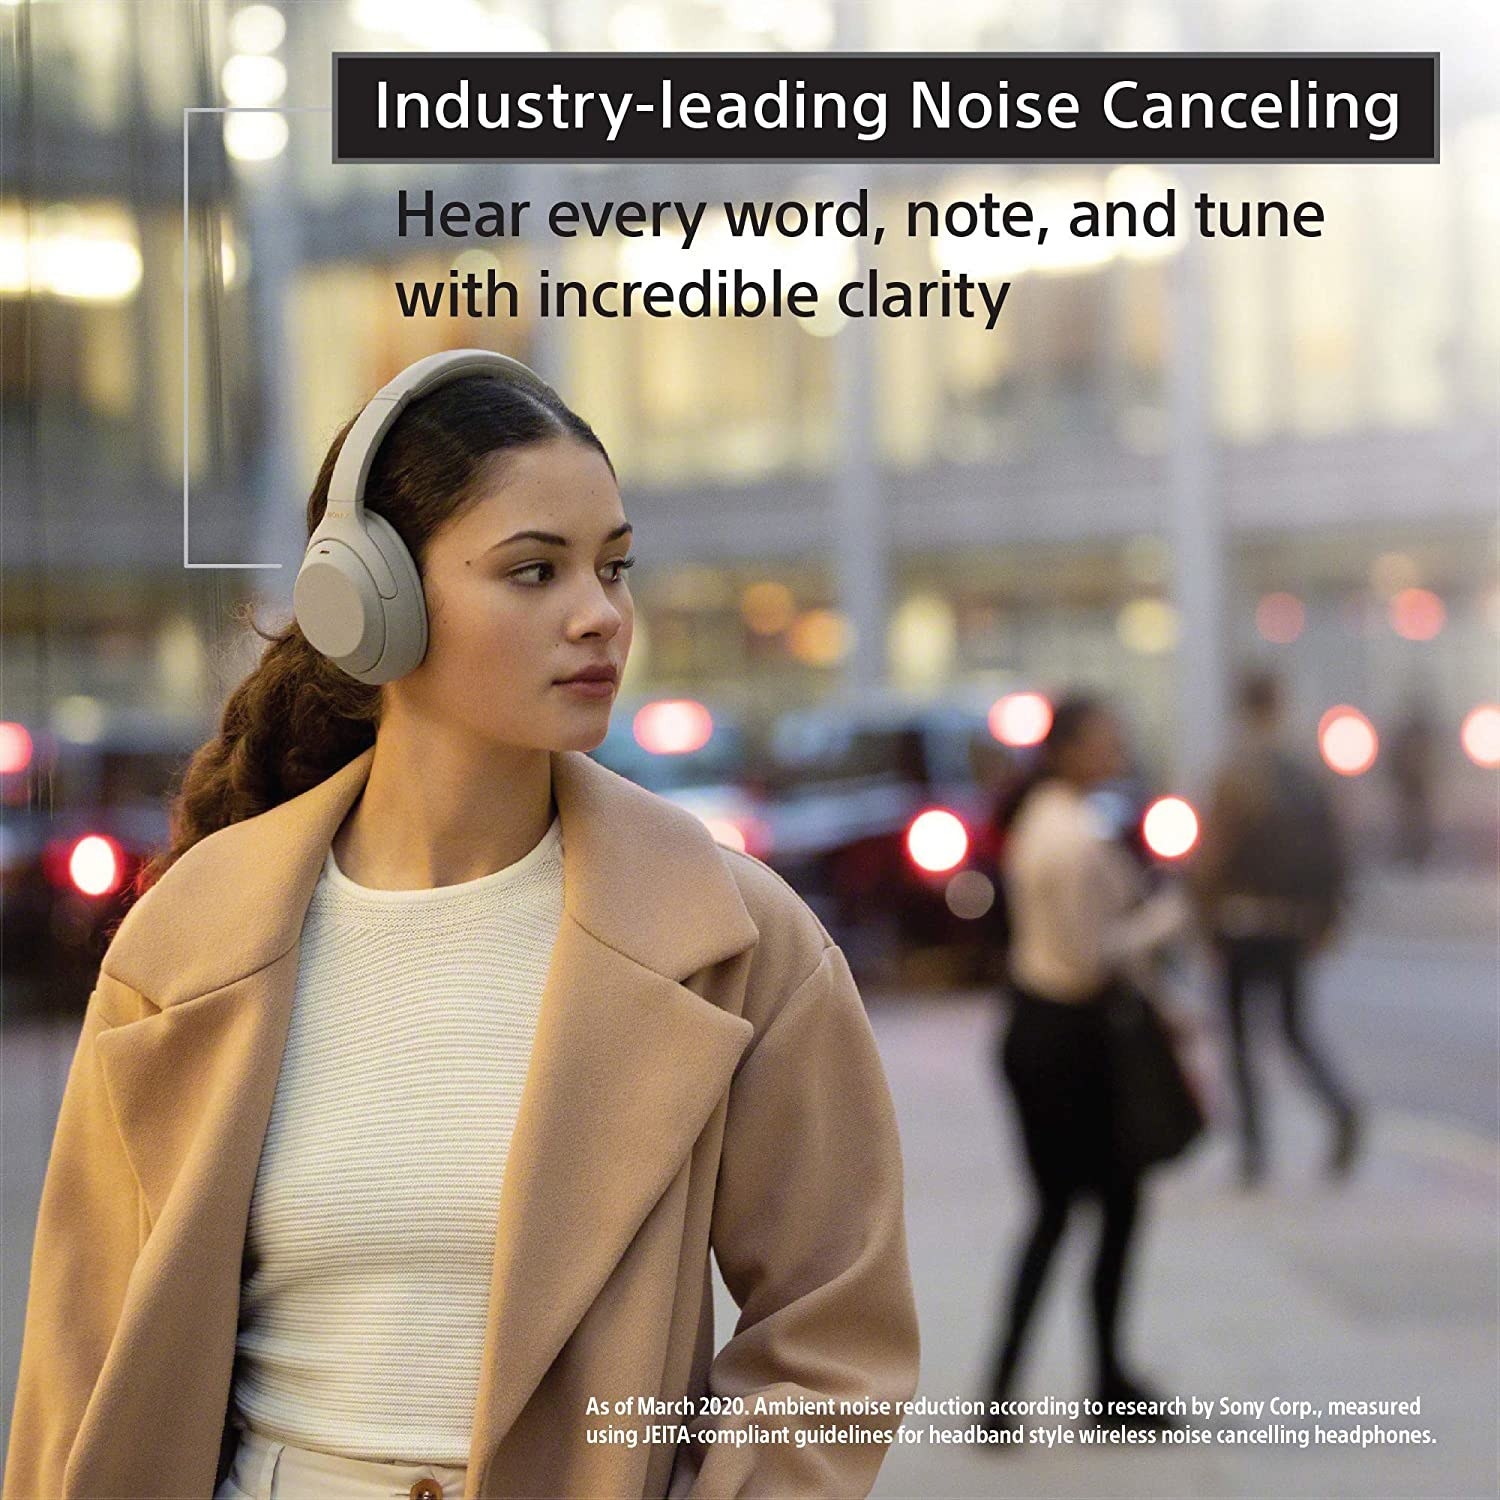 A woman walking with the noise cancellation headphones on